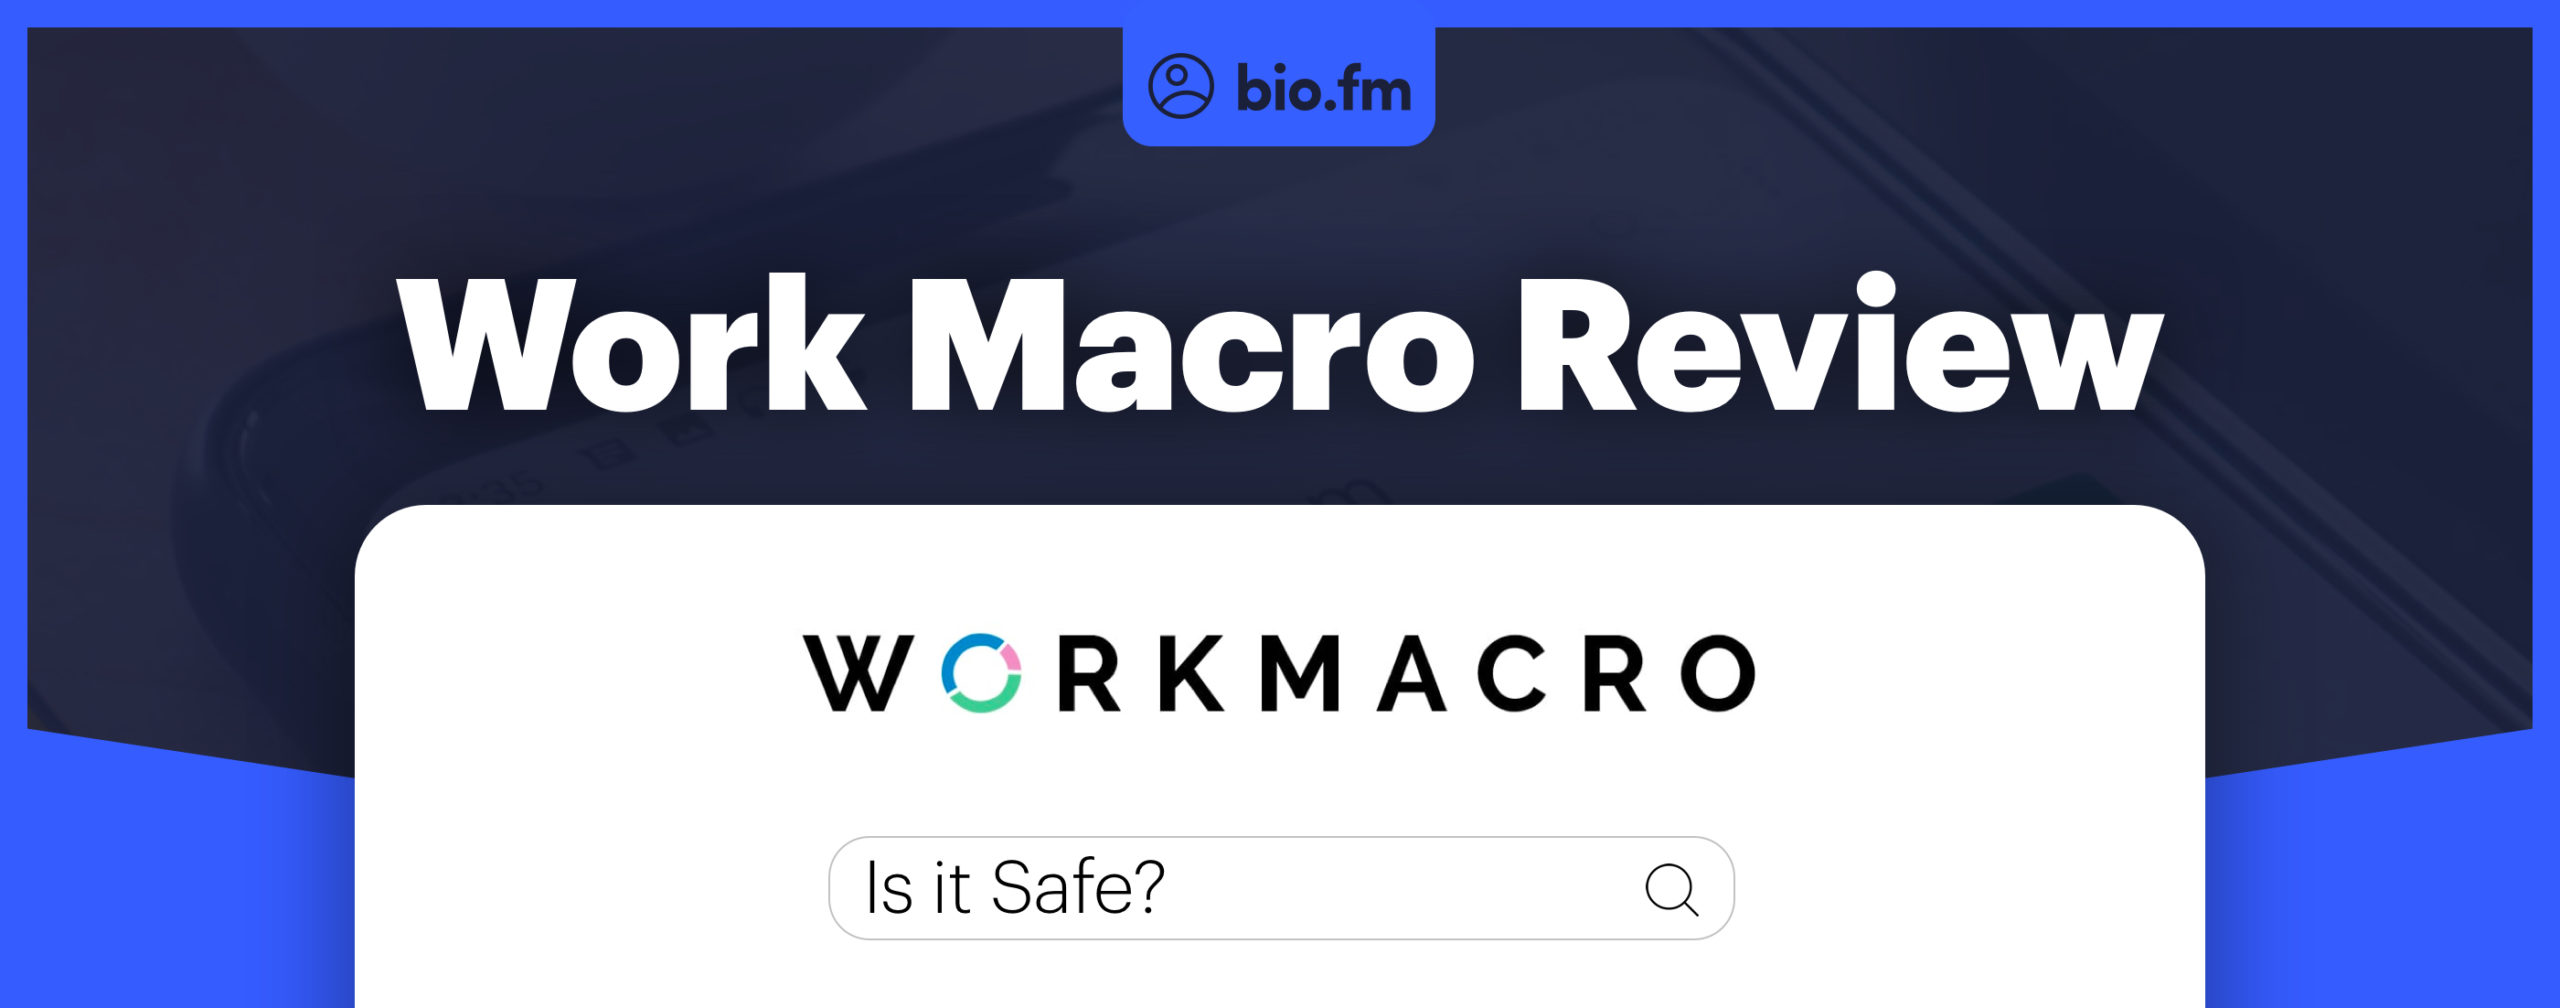 workmacro review featured image